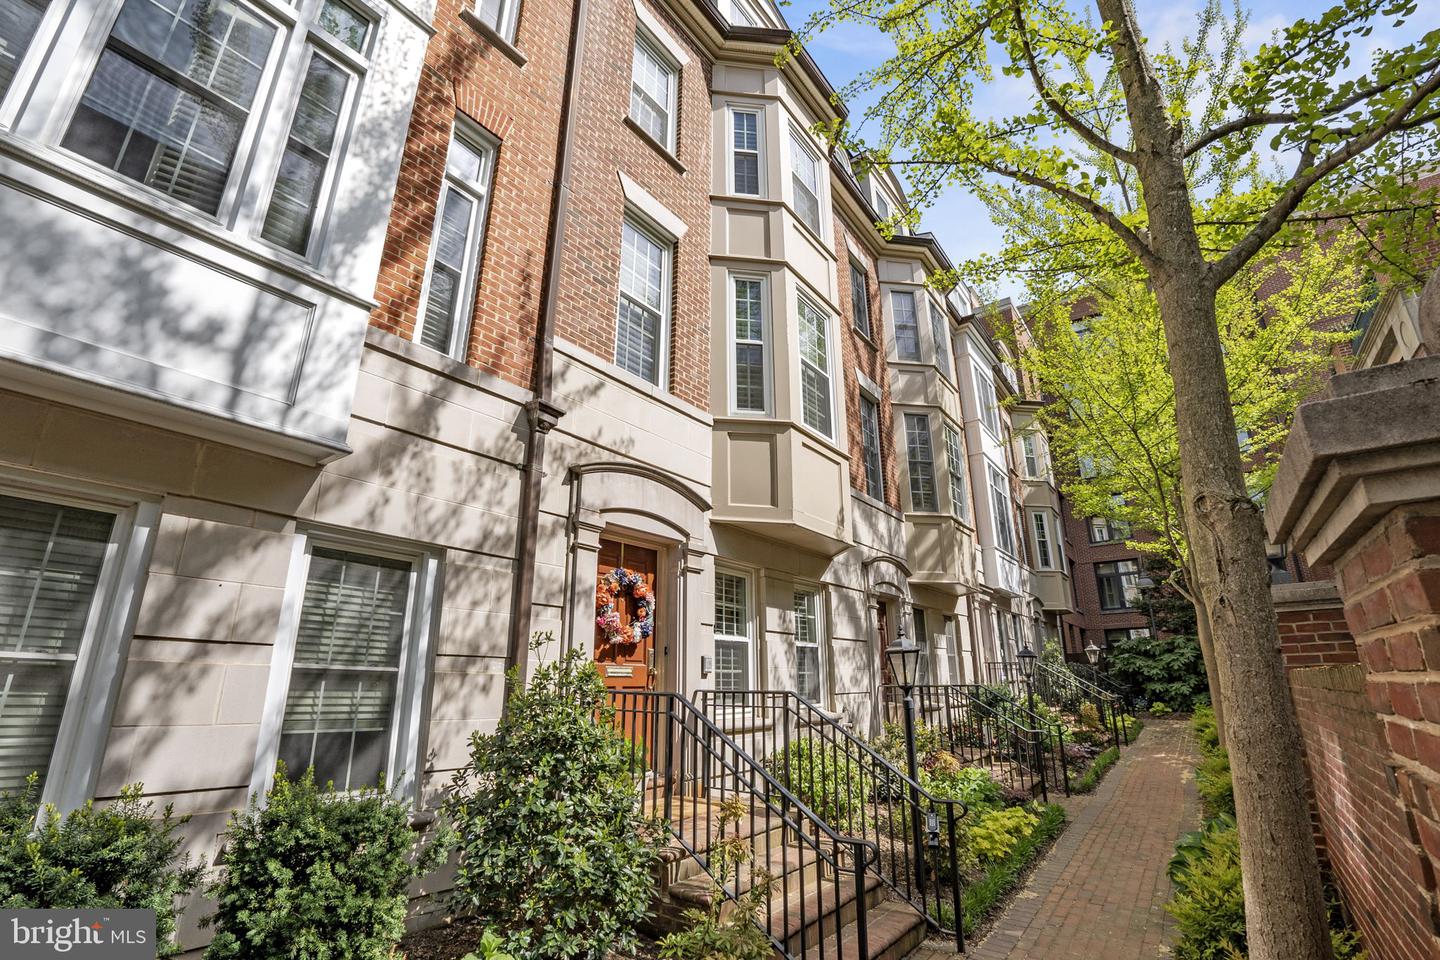 View Bethesda, MD 20814 townhome